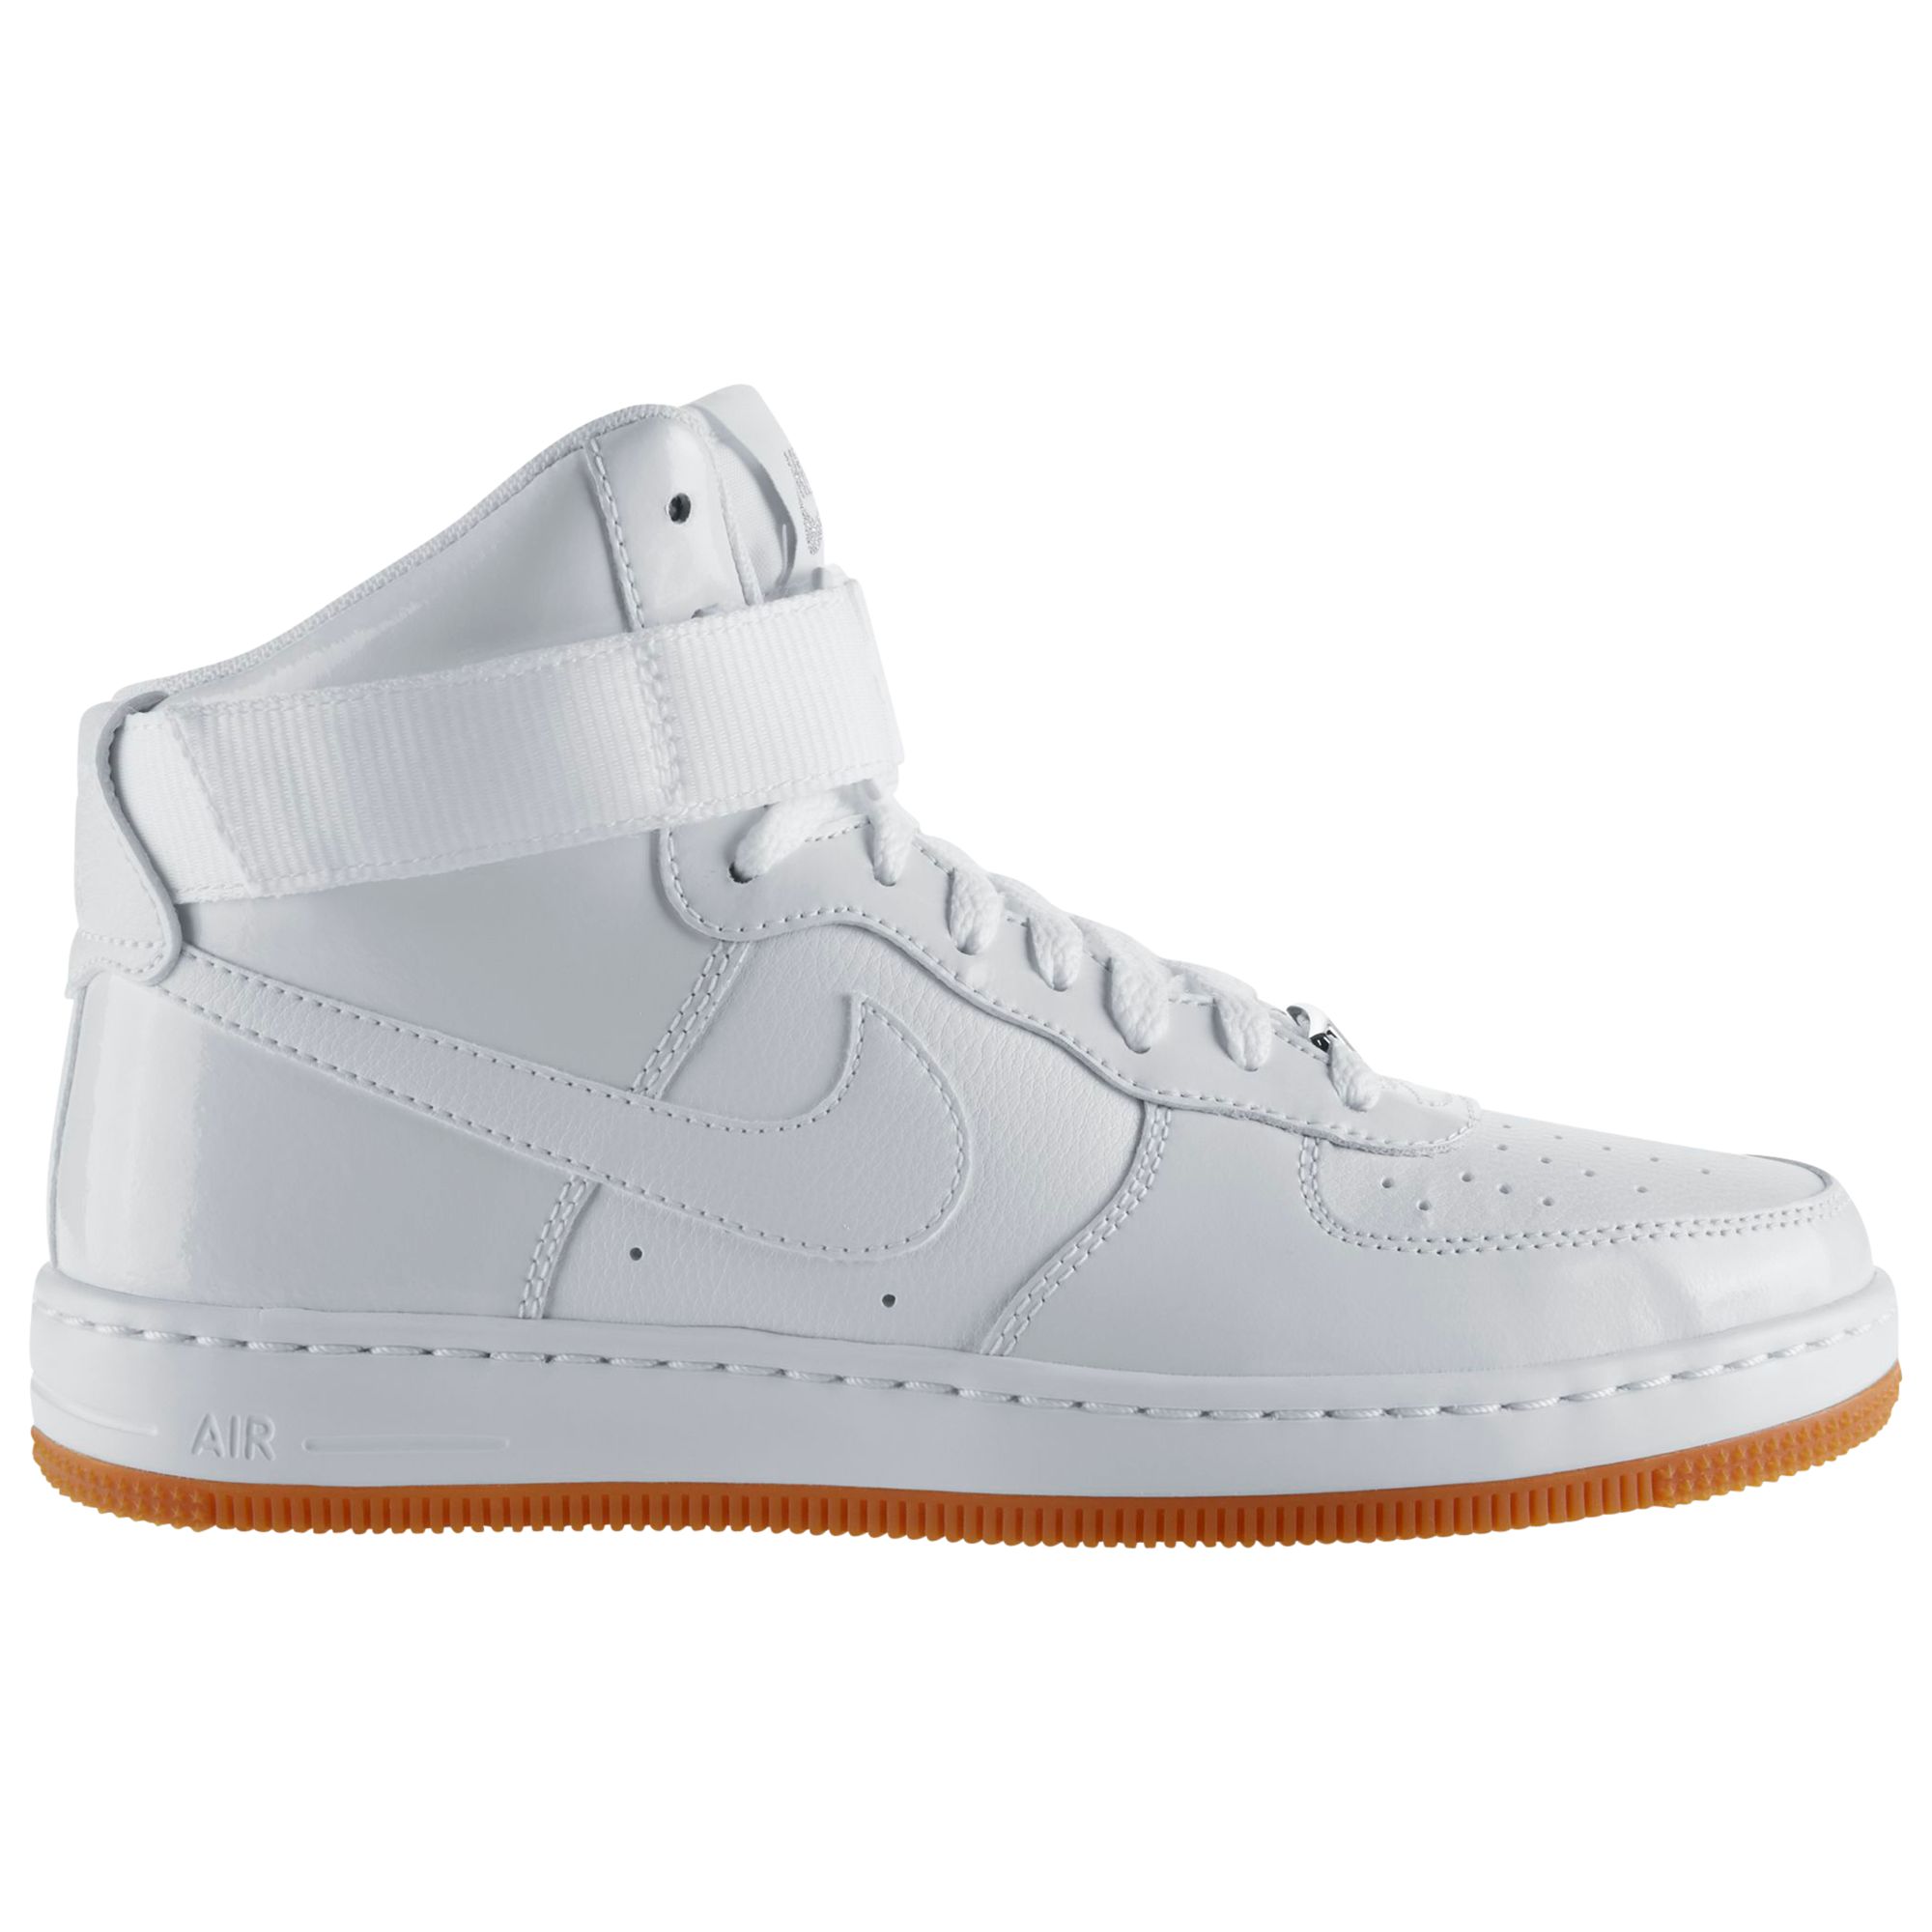 Nike Air Force One Women's Cross Trainers